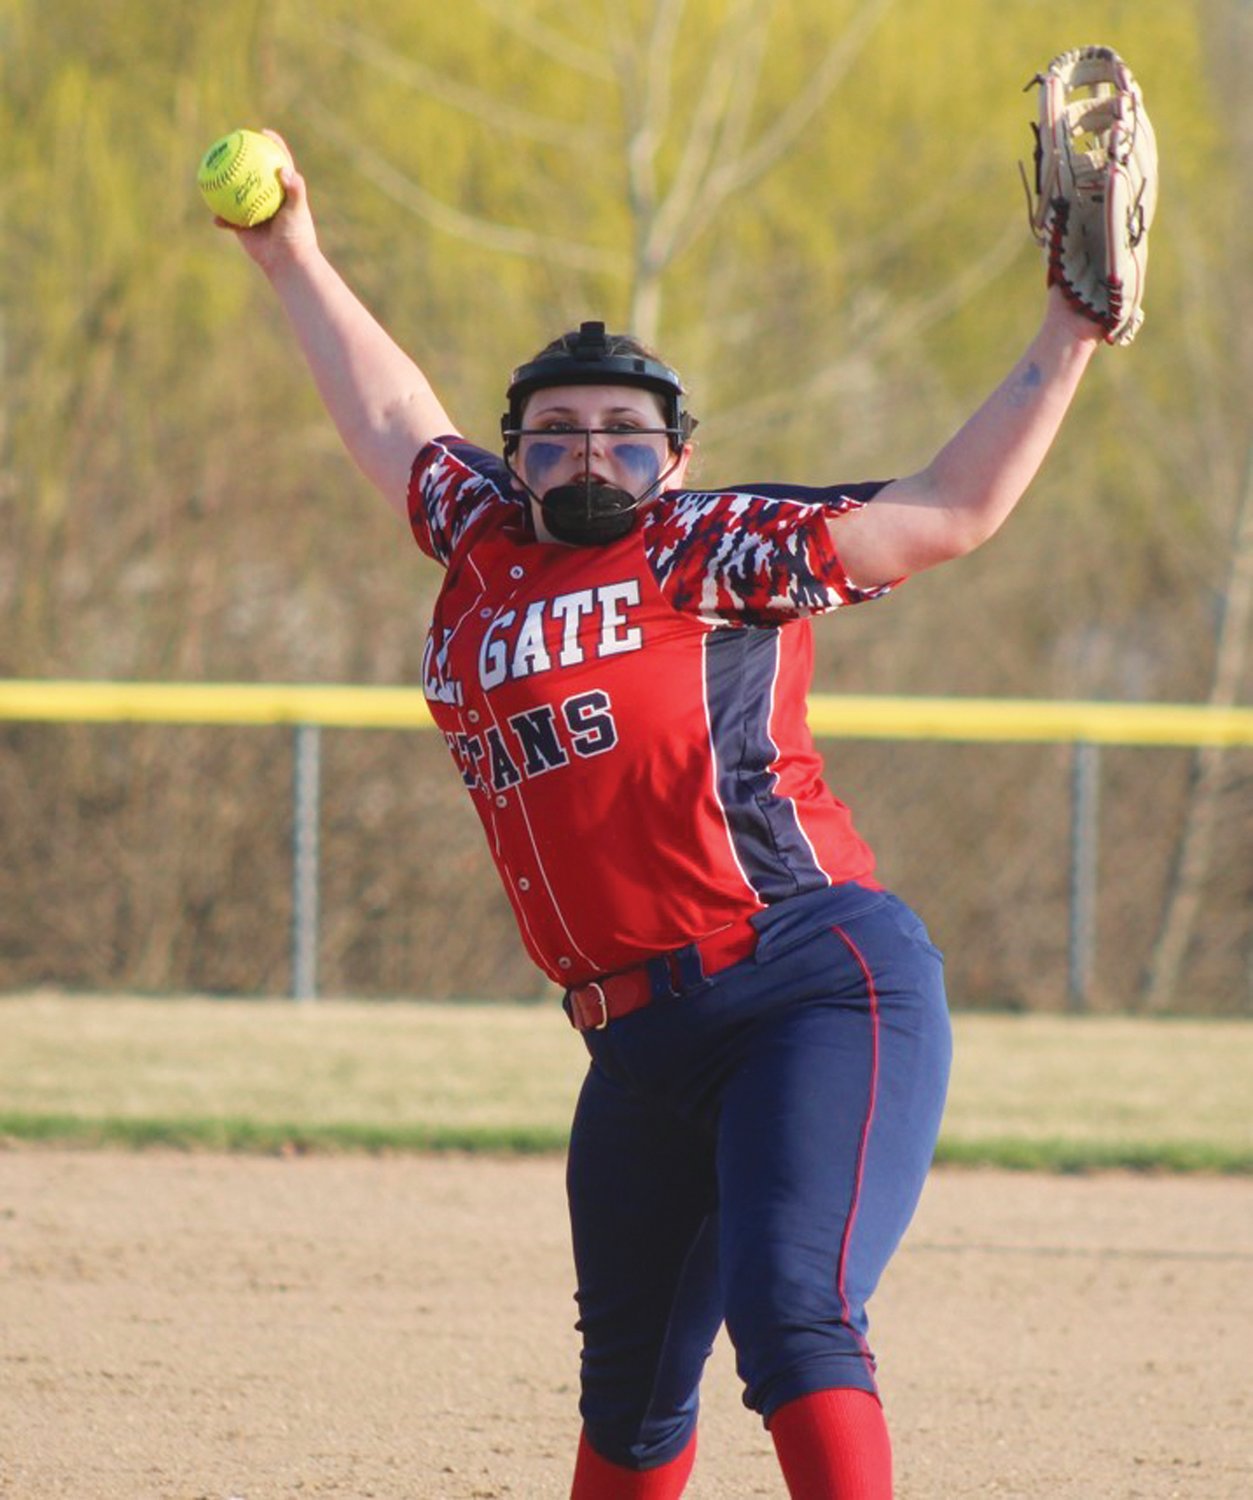 WINDING UP: Toll Gate’s Delaney Wilson delivers a pitch. (Photos by Alex Sponseller)